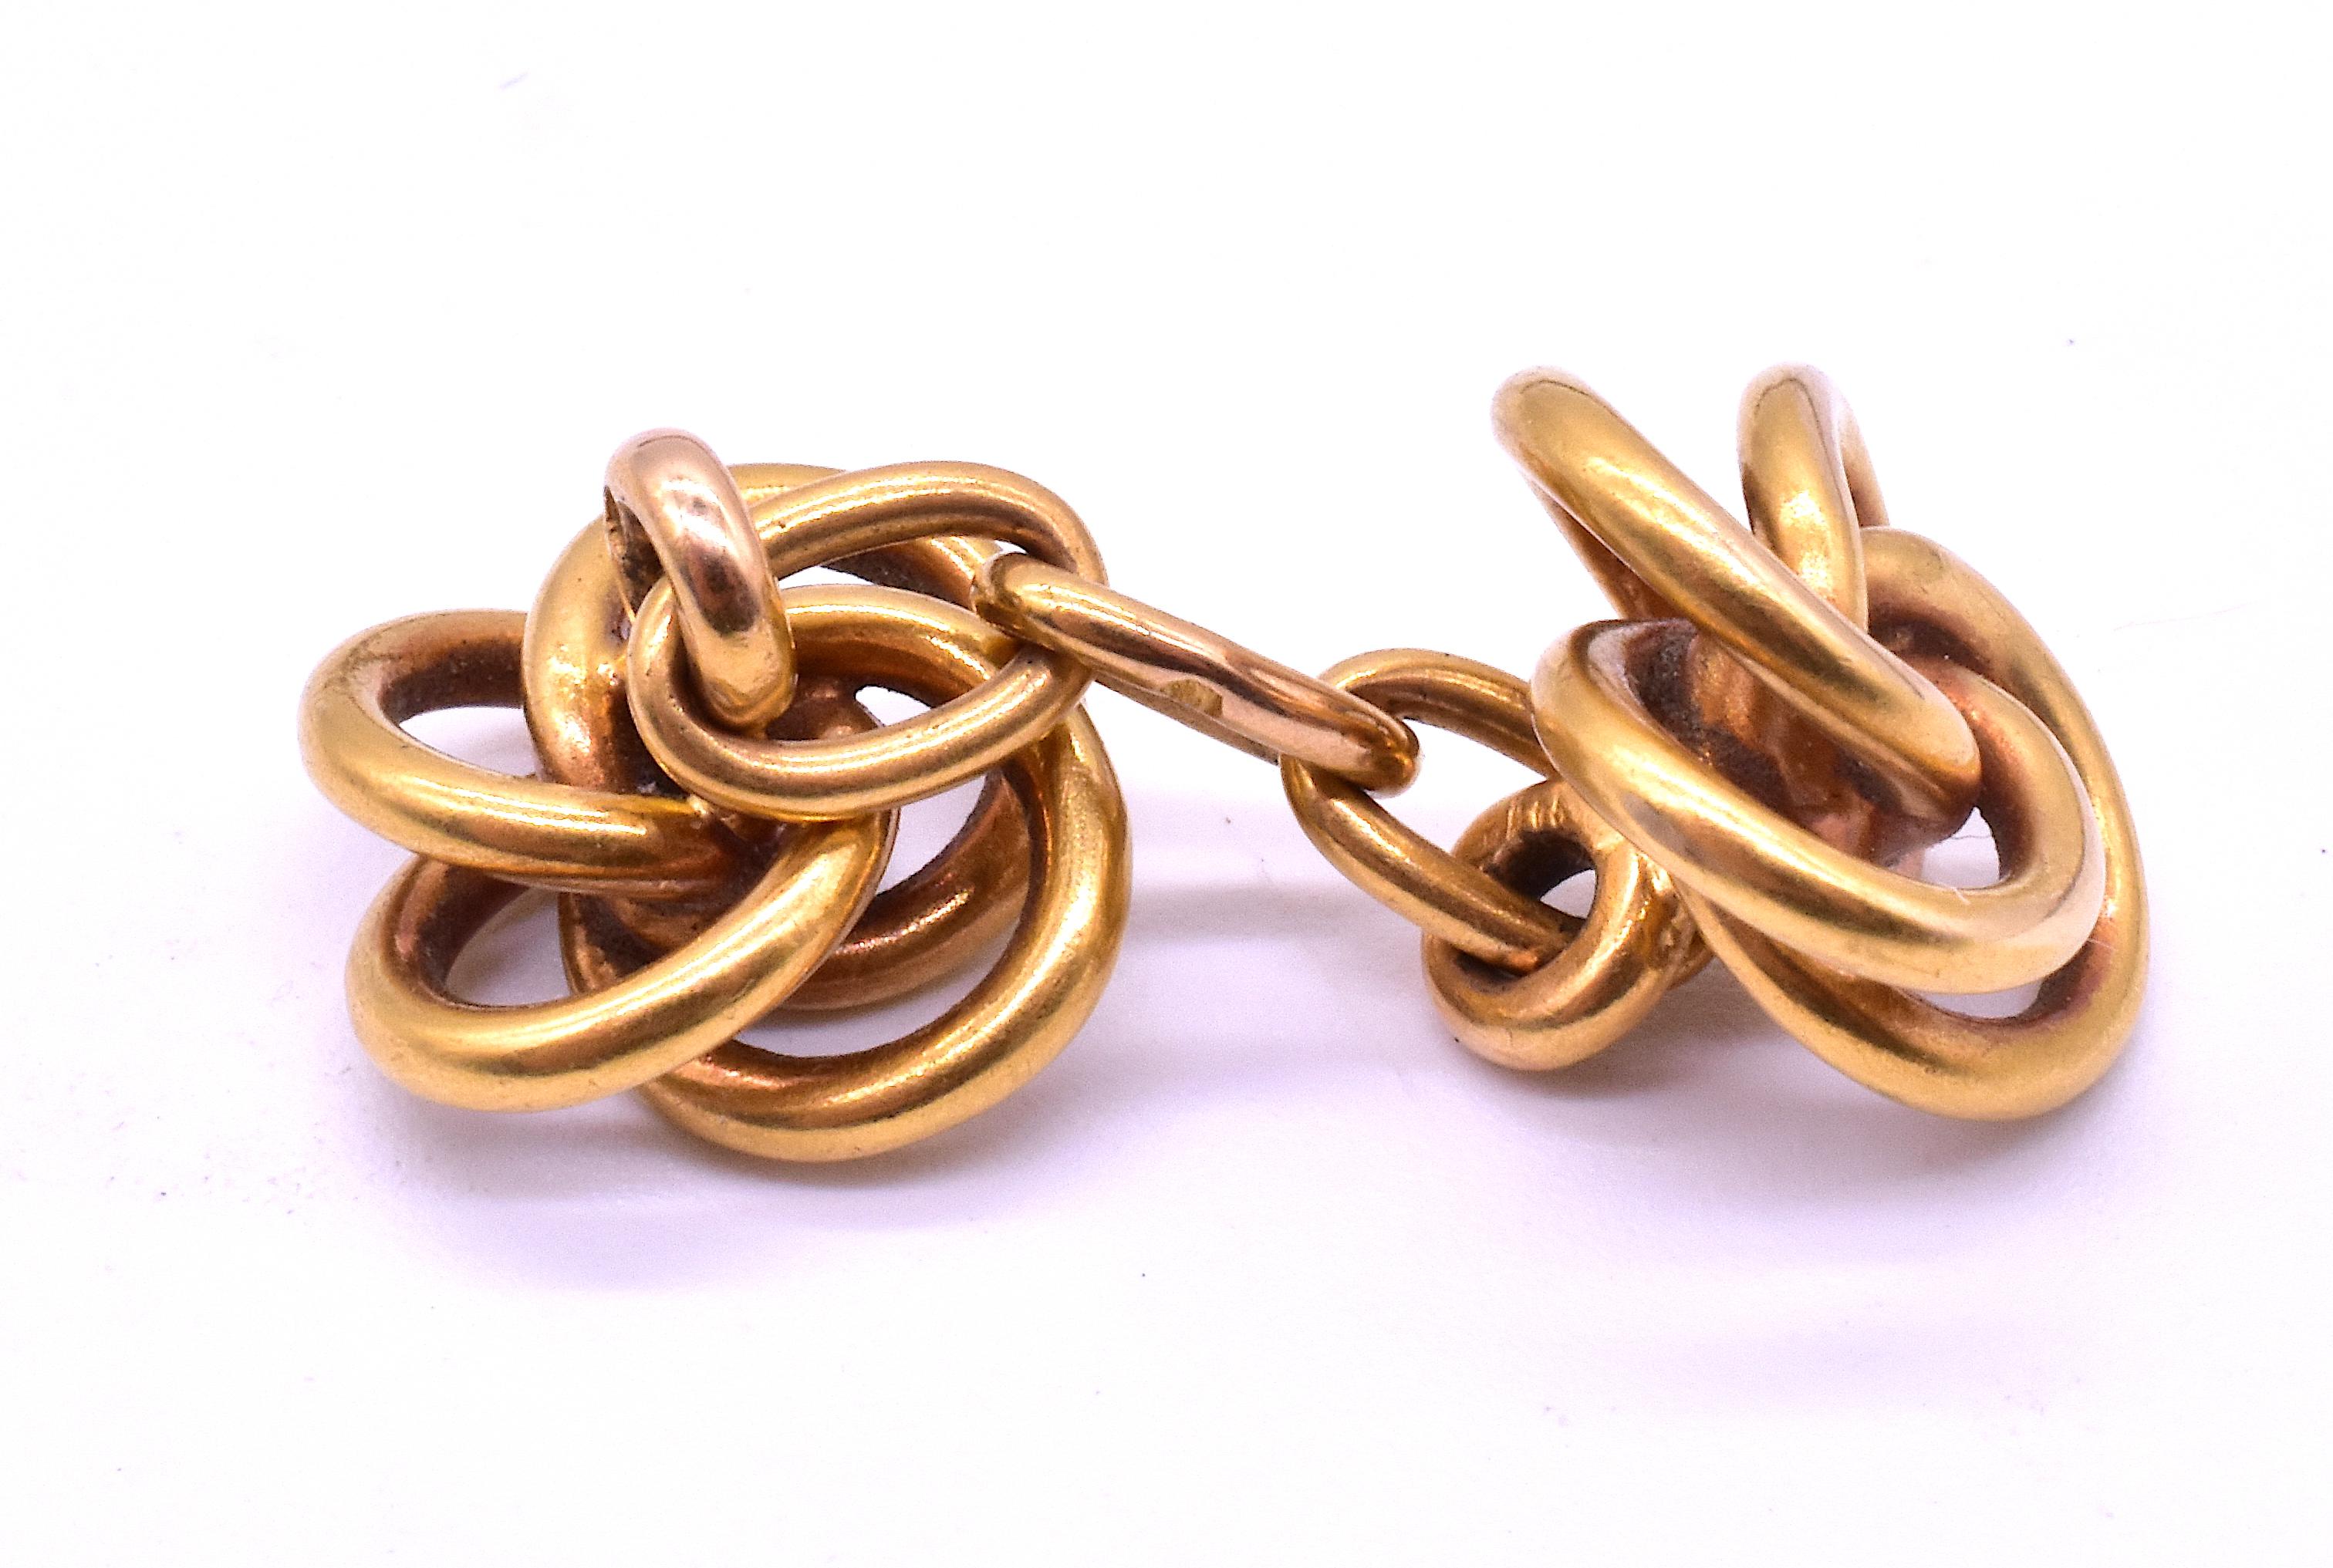 Classic 14 Karat double sided knot shaped gold cufflinks. The love knot dates to antiquity, symbolizing love, friendship and affection. The simple knot, lacking a beginning, middle or end, evokes the eternal connection and unbreakable bond between